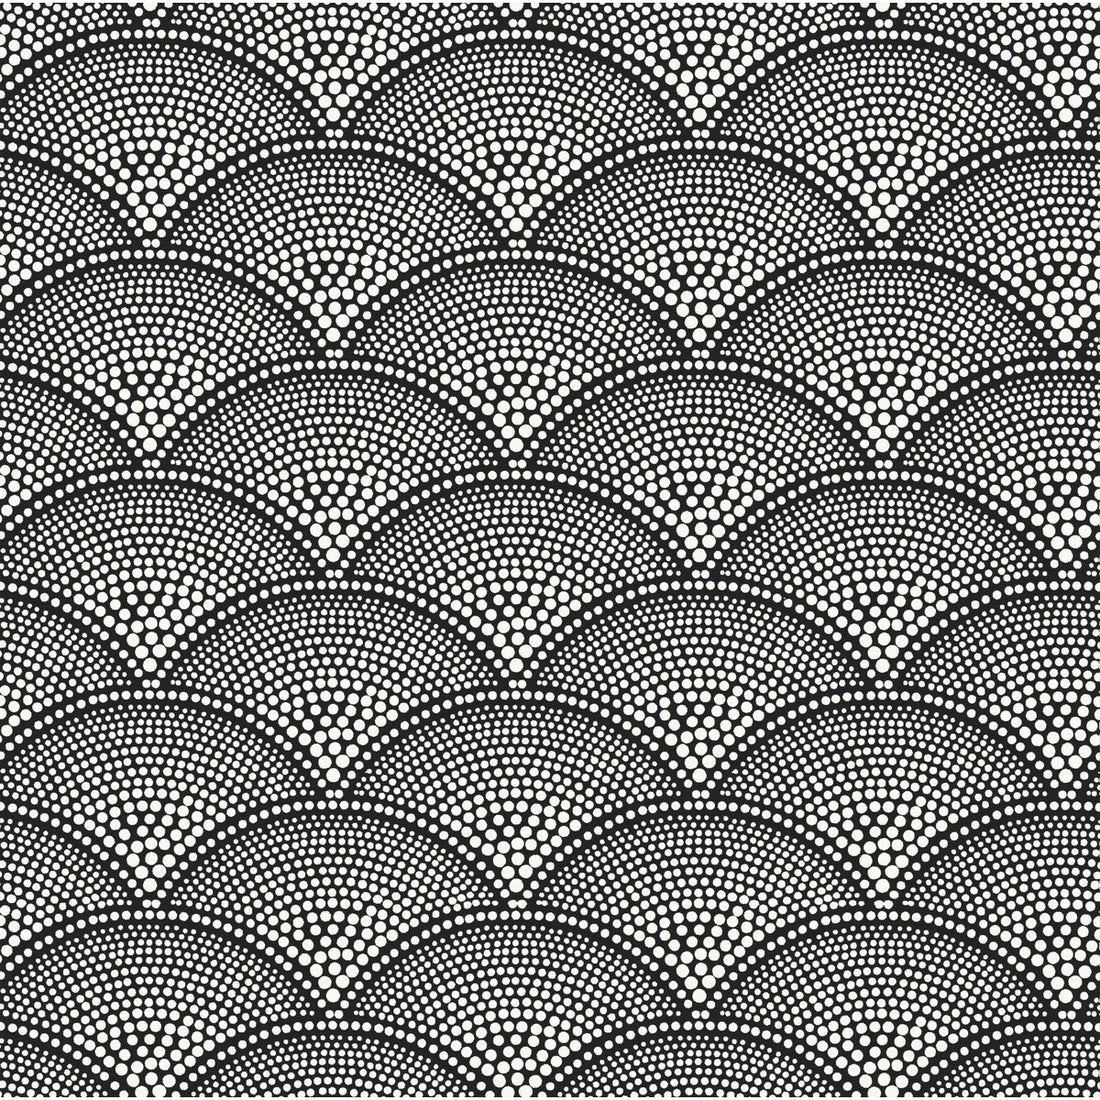 Feather Fan fabric in wht on blk color - pattern F111/8031.CS.0 - by Cole &amp; Son in the Cole &amp; Son Contemporary Fabrics collection